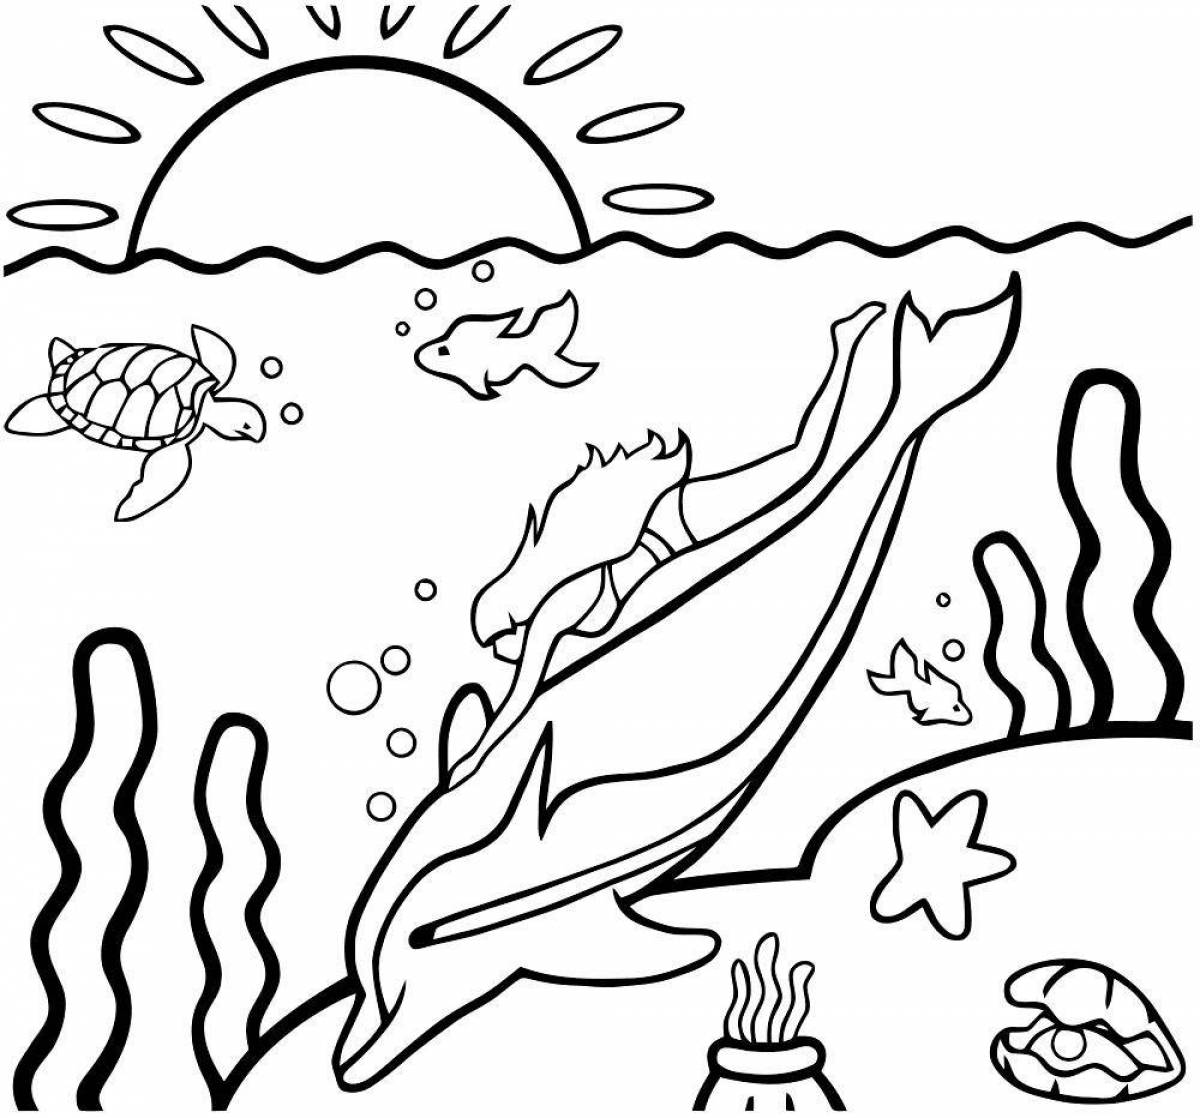 Outstanding marine coloring book for kids